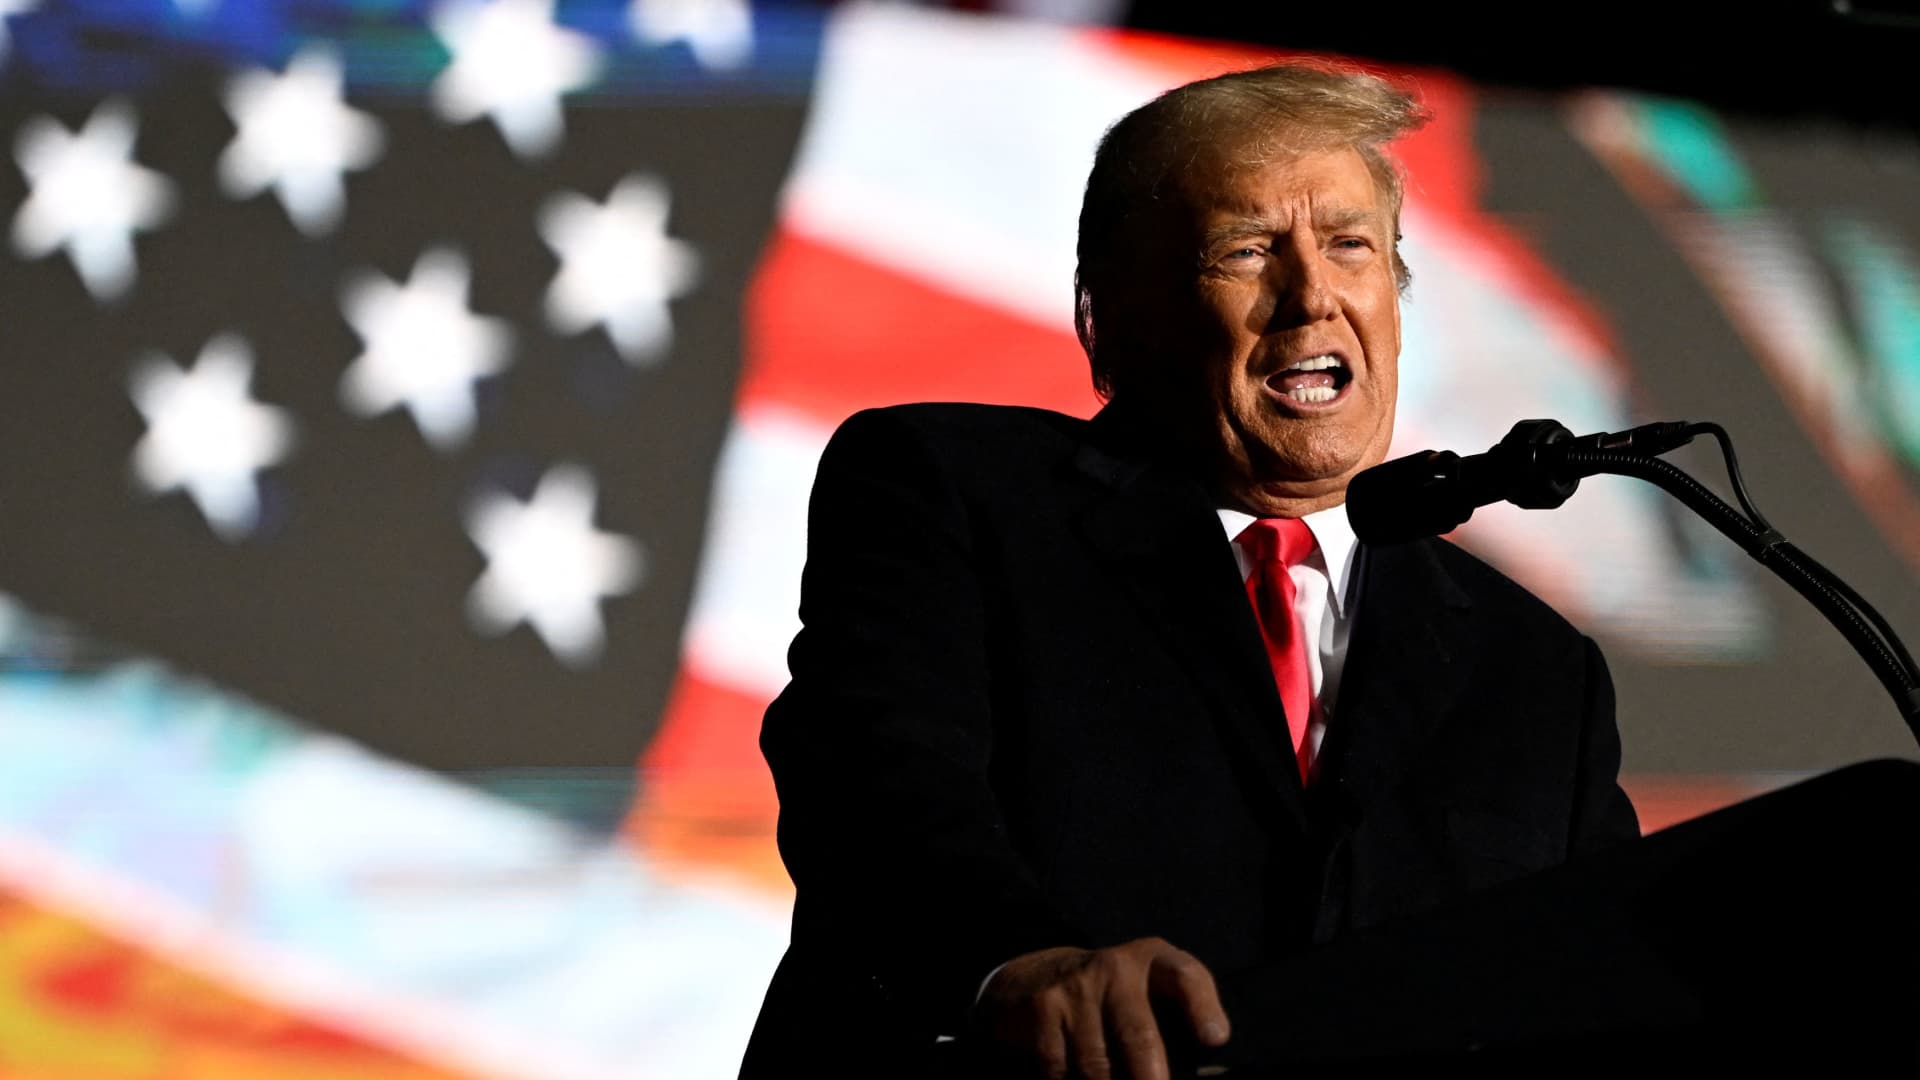 Former U.S. President Donald Trump speaks at a rally to support Republican candidates ahead of midterm elections, in Dayton, Ohio, U.S. November 7, 2022. 